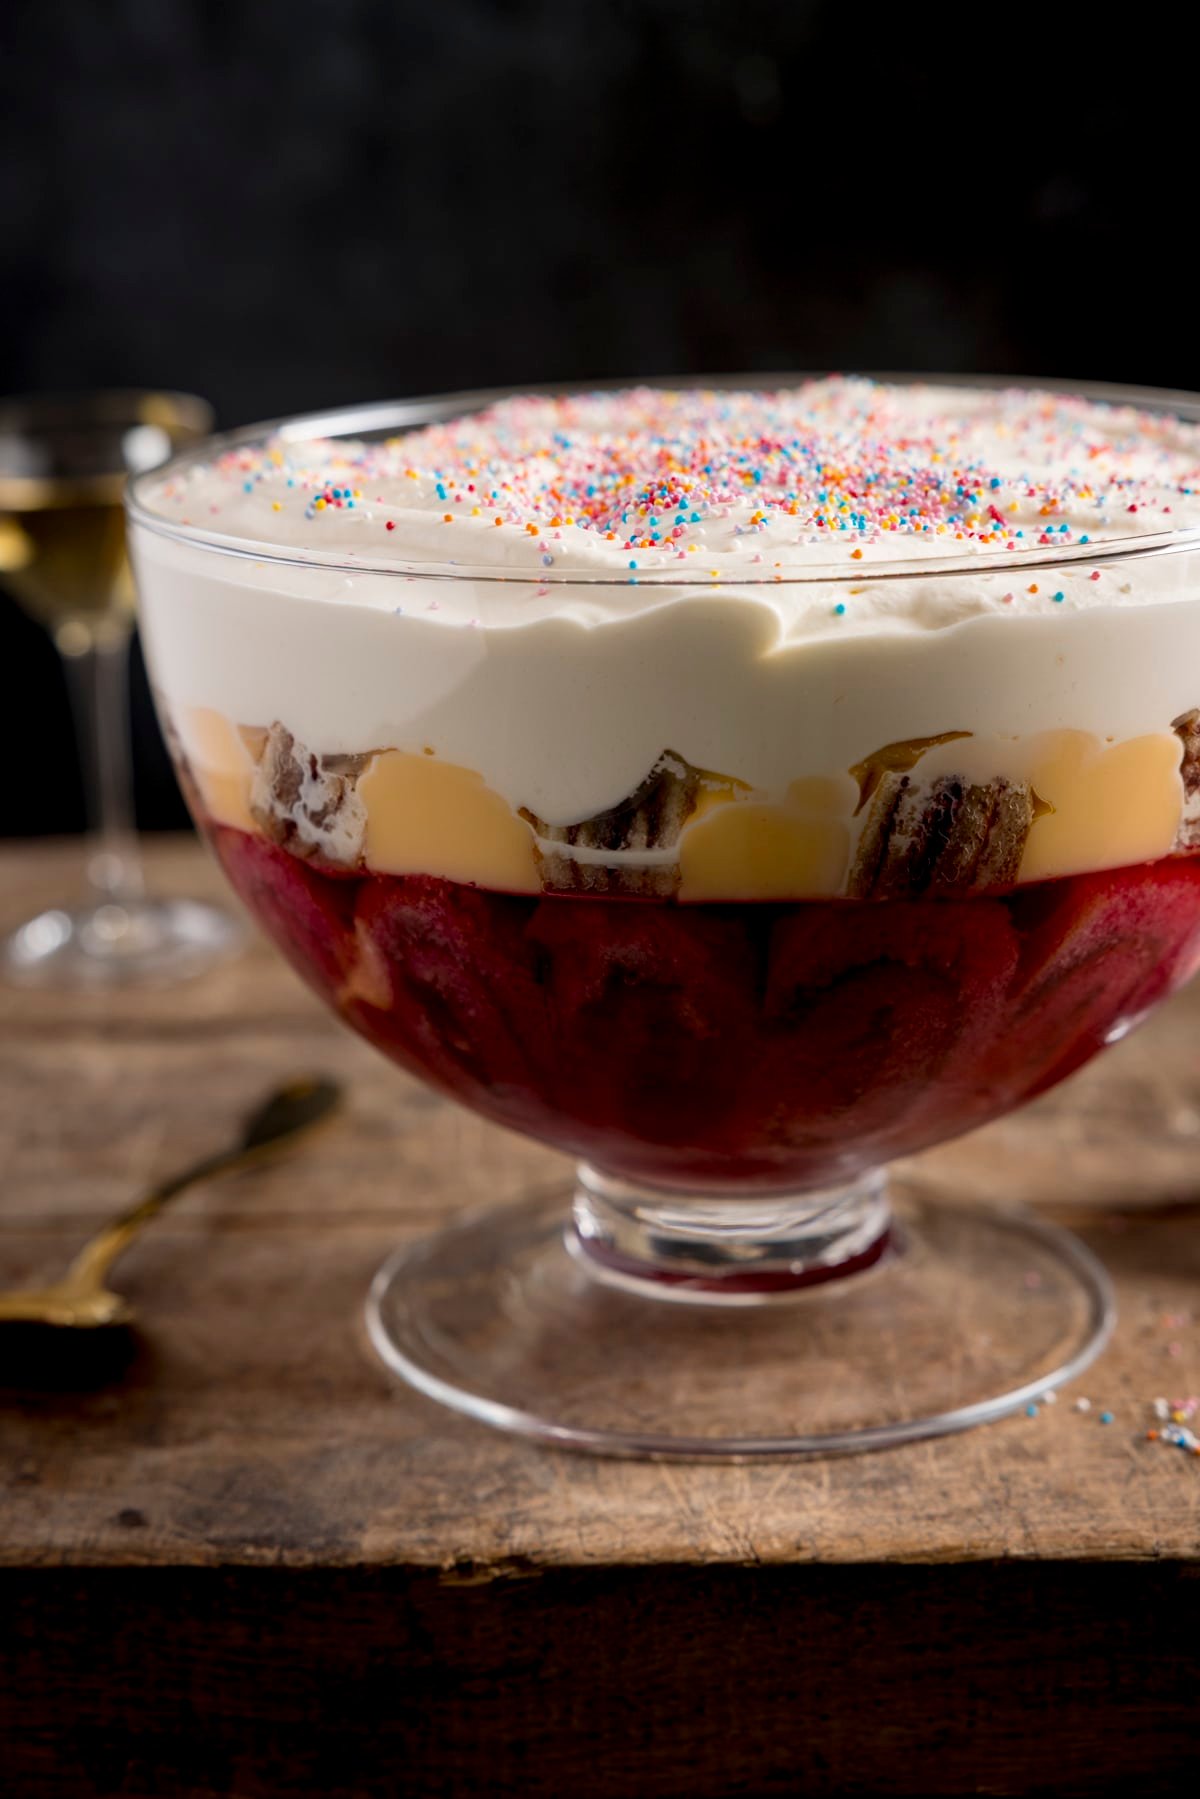 Side image of a large glass bowl of sherry trifle on a wooden table against a dark background.